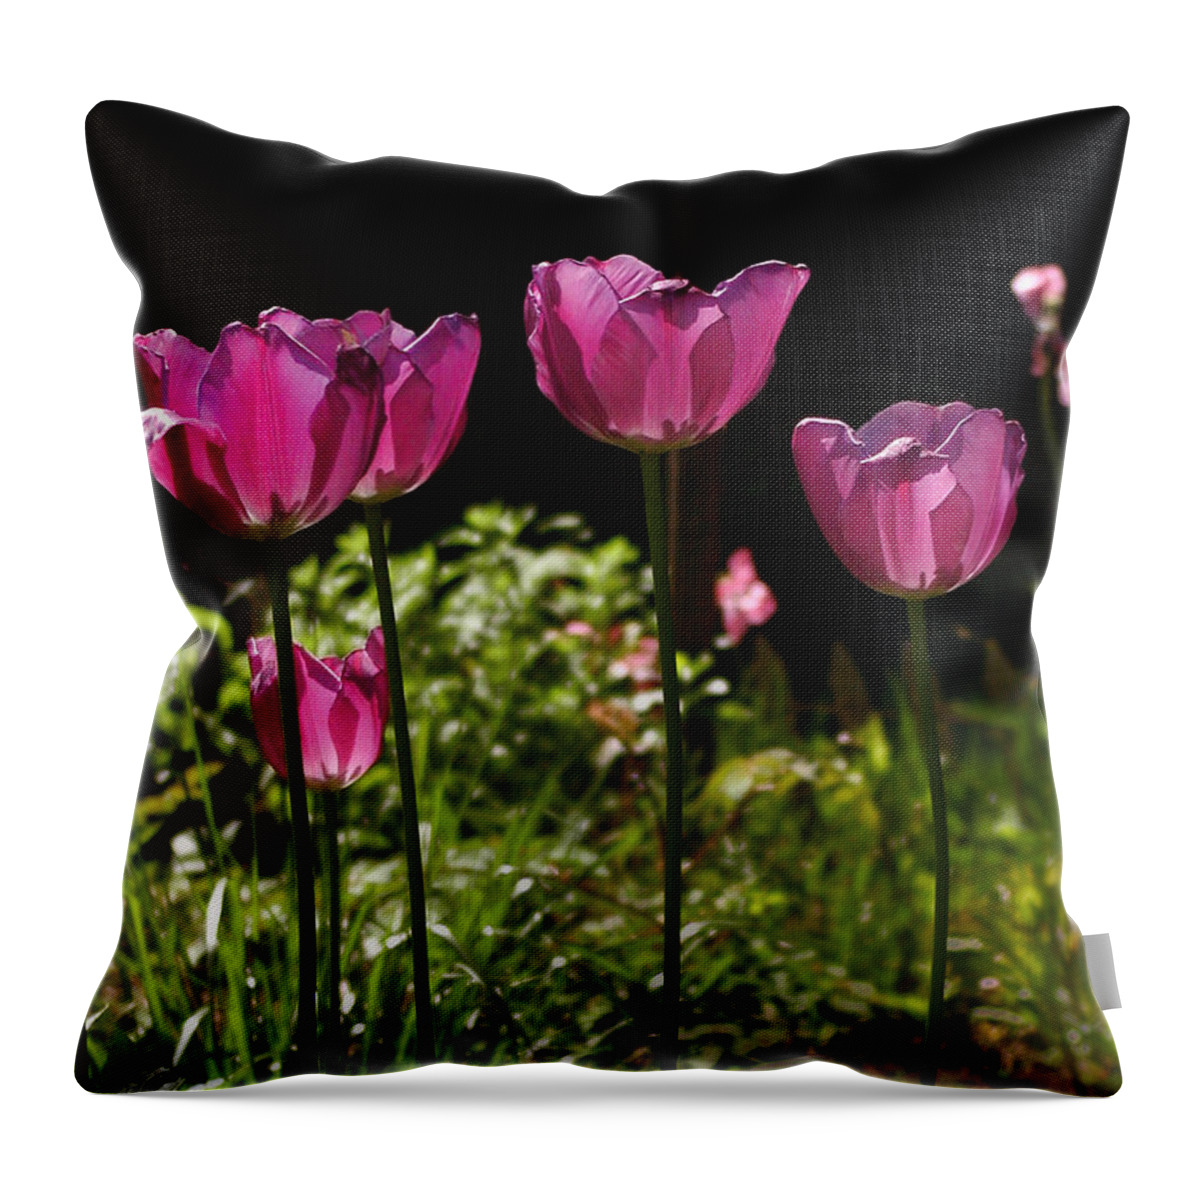 Tulips Throw Pillow featuring the photograph Tulips by Bill Cannon